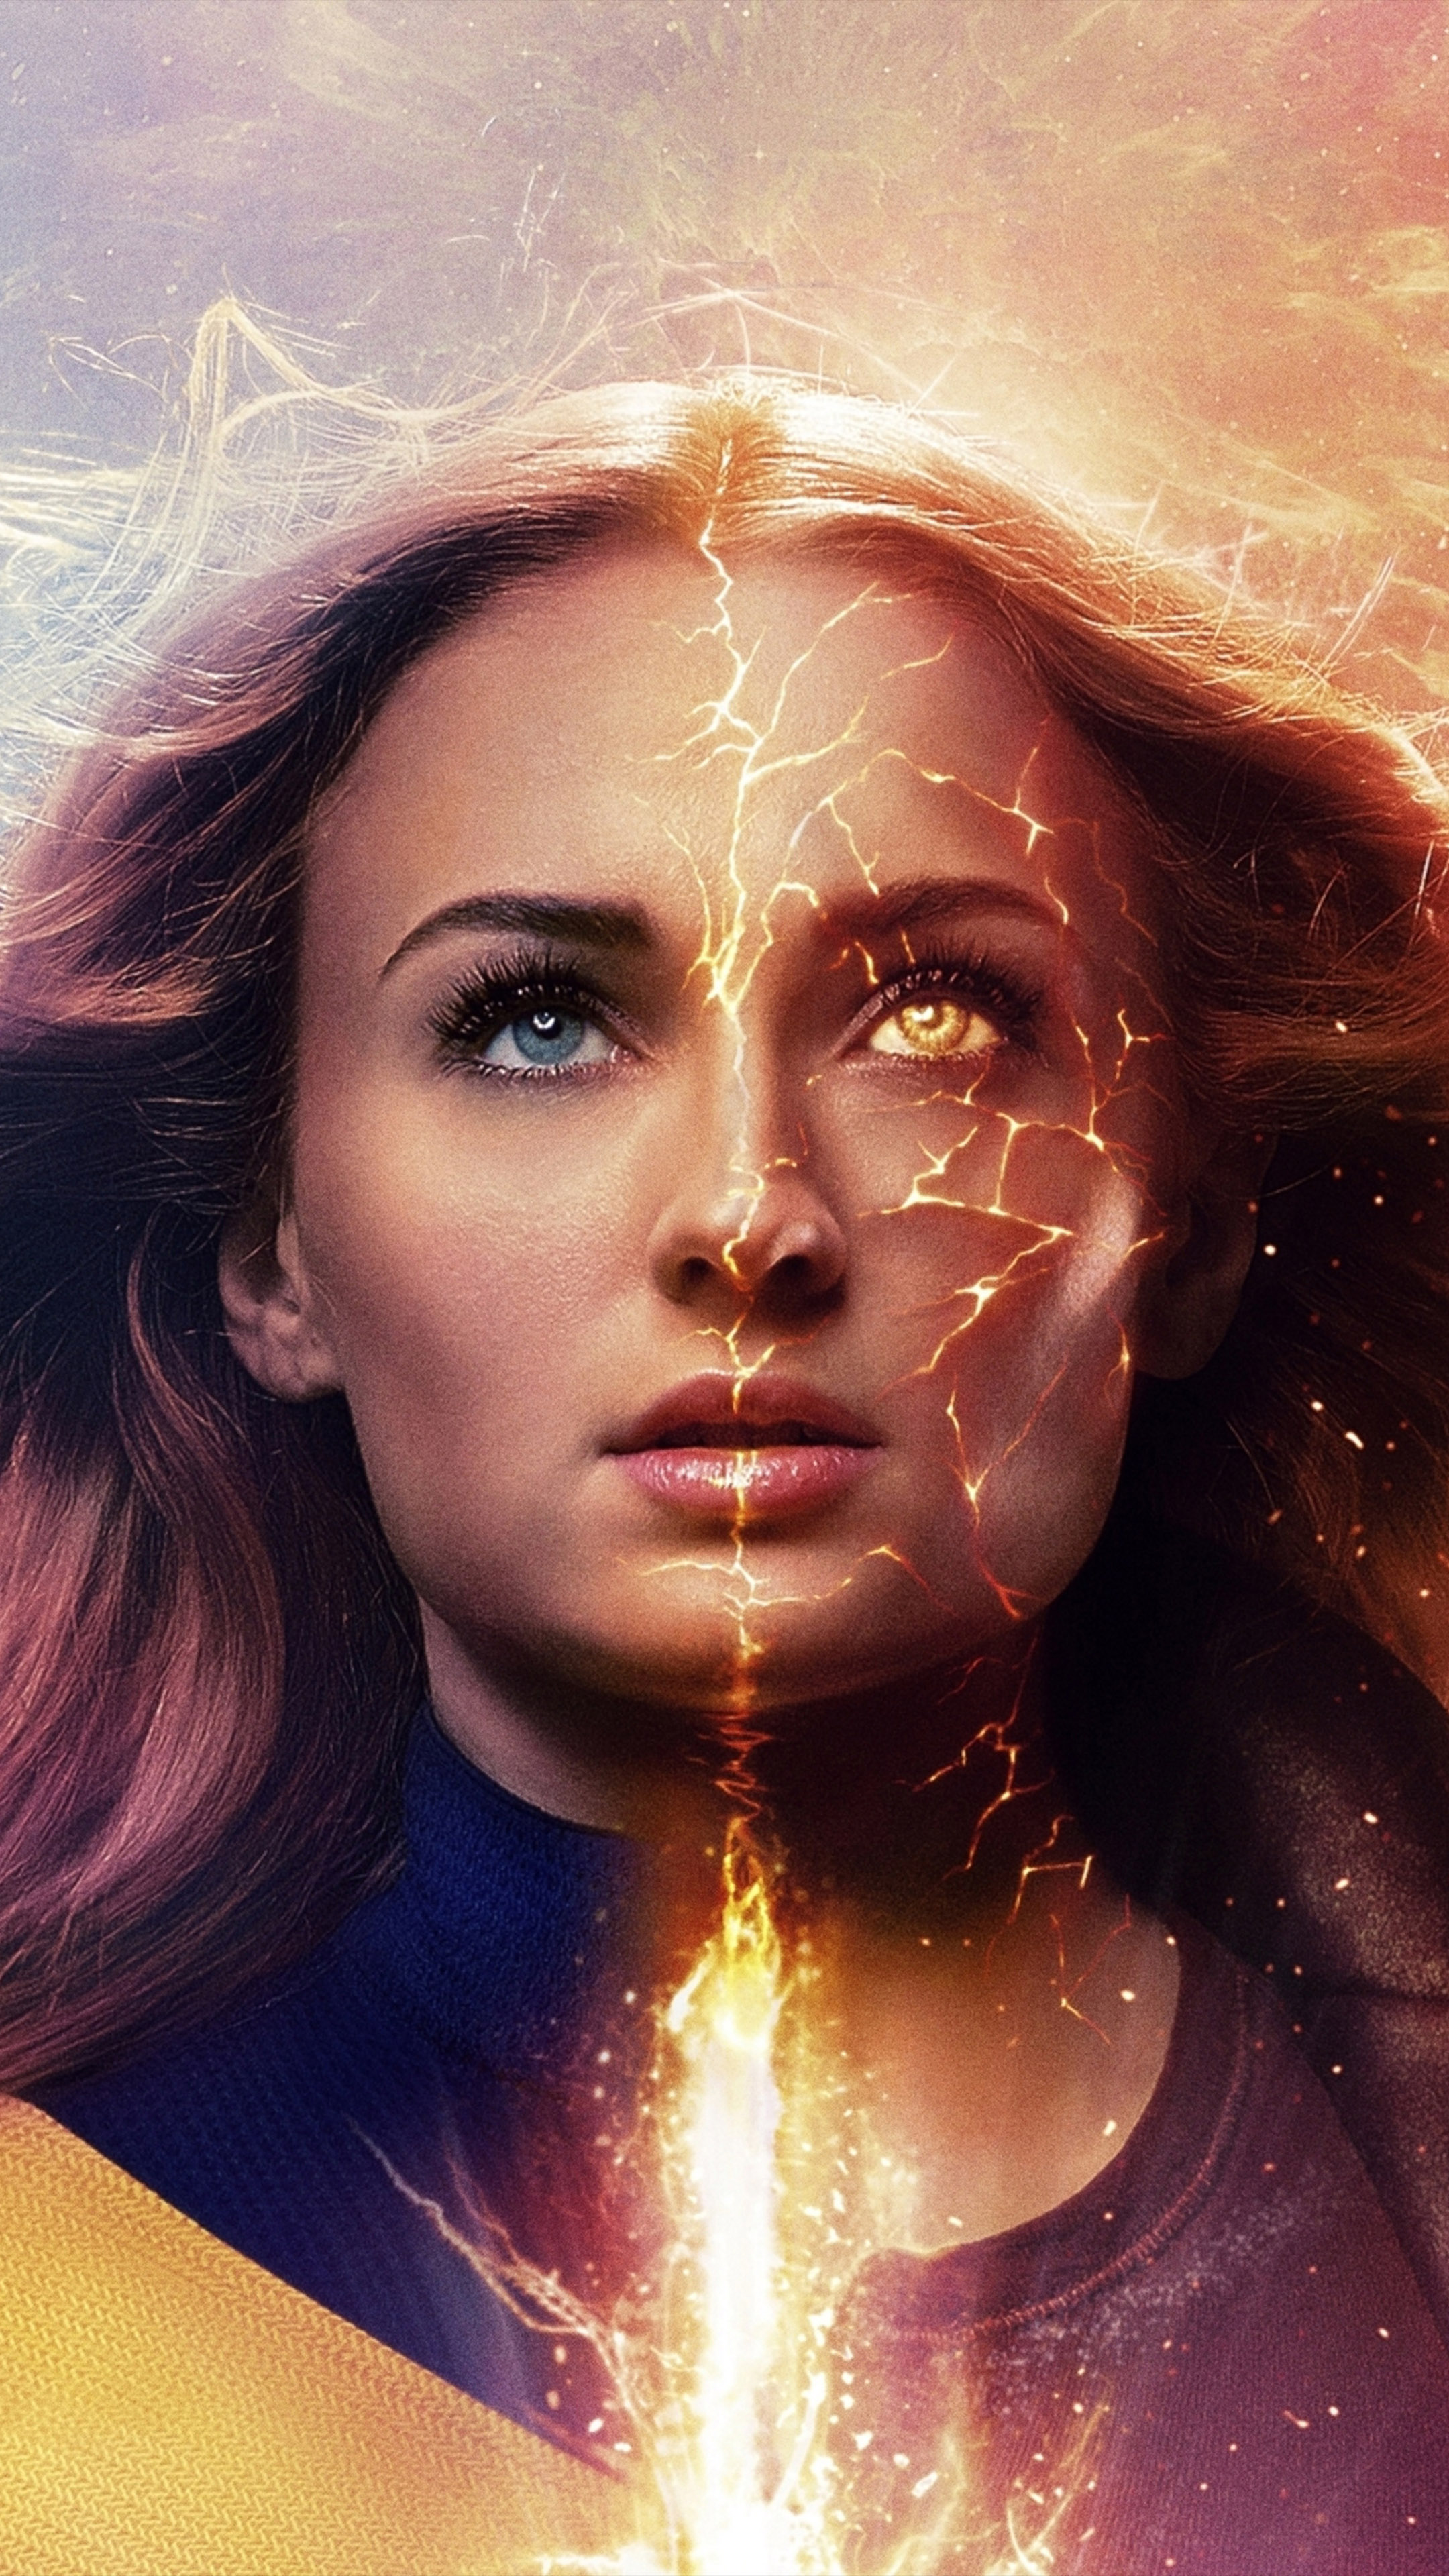 X Men Dark Phoenix 4k 2019 Poster HD Movies 4k Wallpapers Images  Backgrounds Photos and Pictures